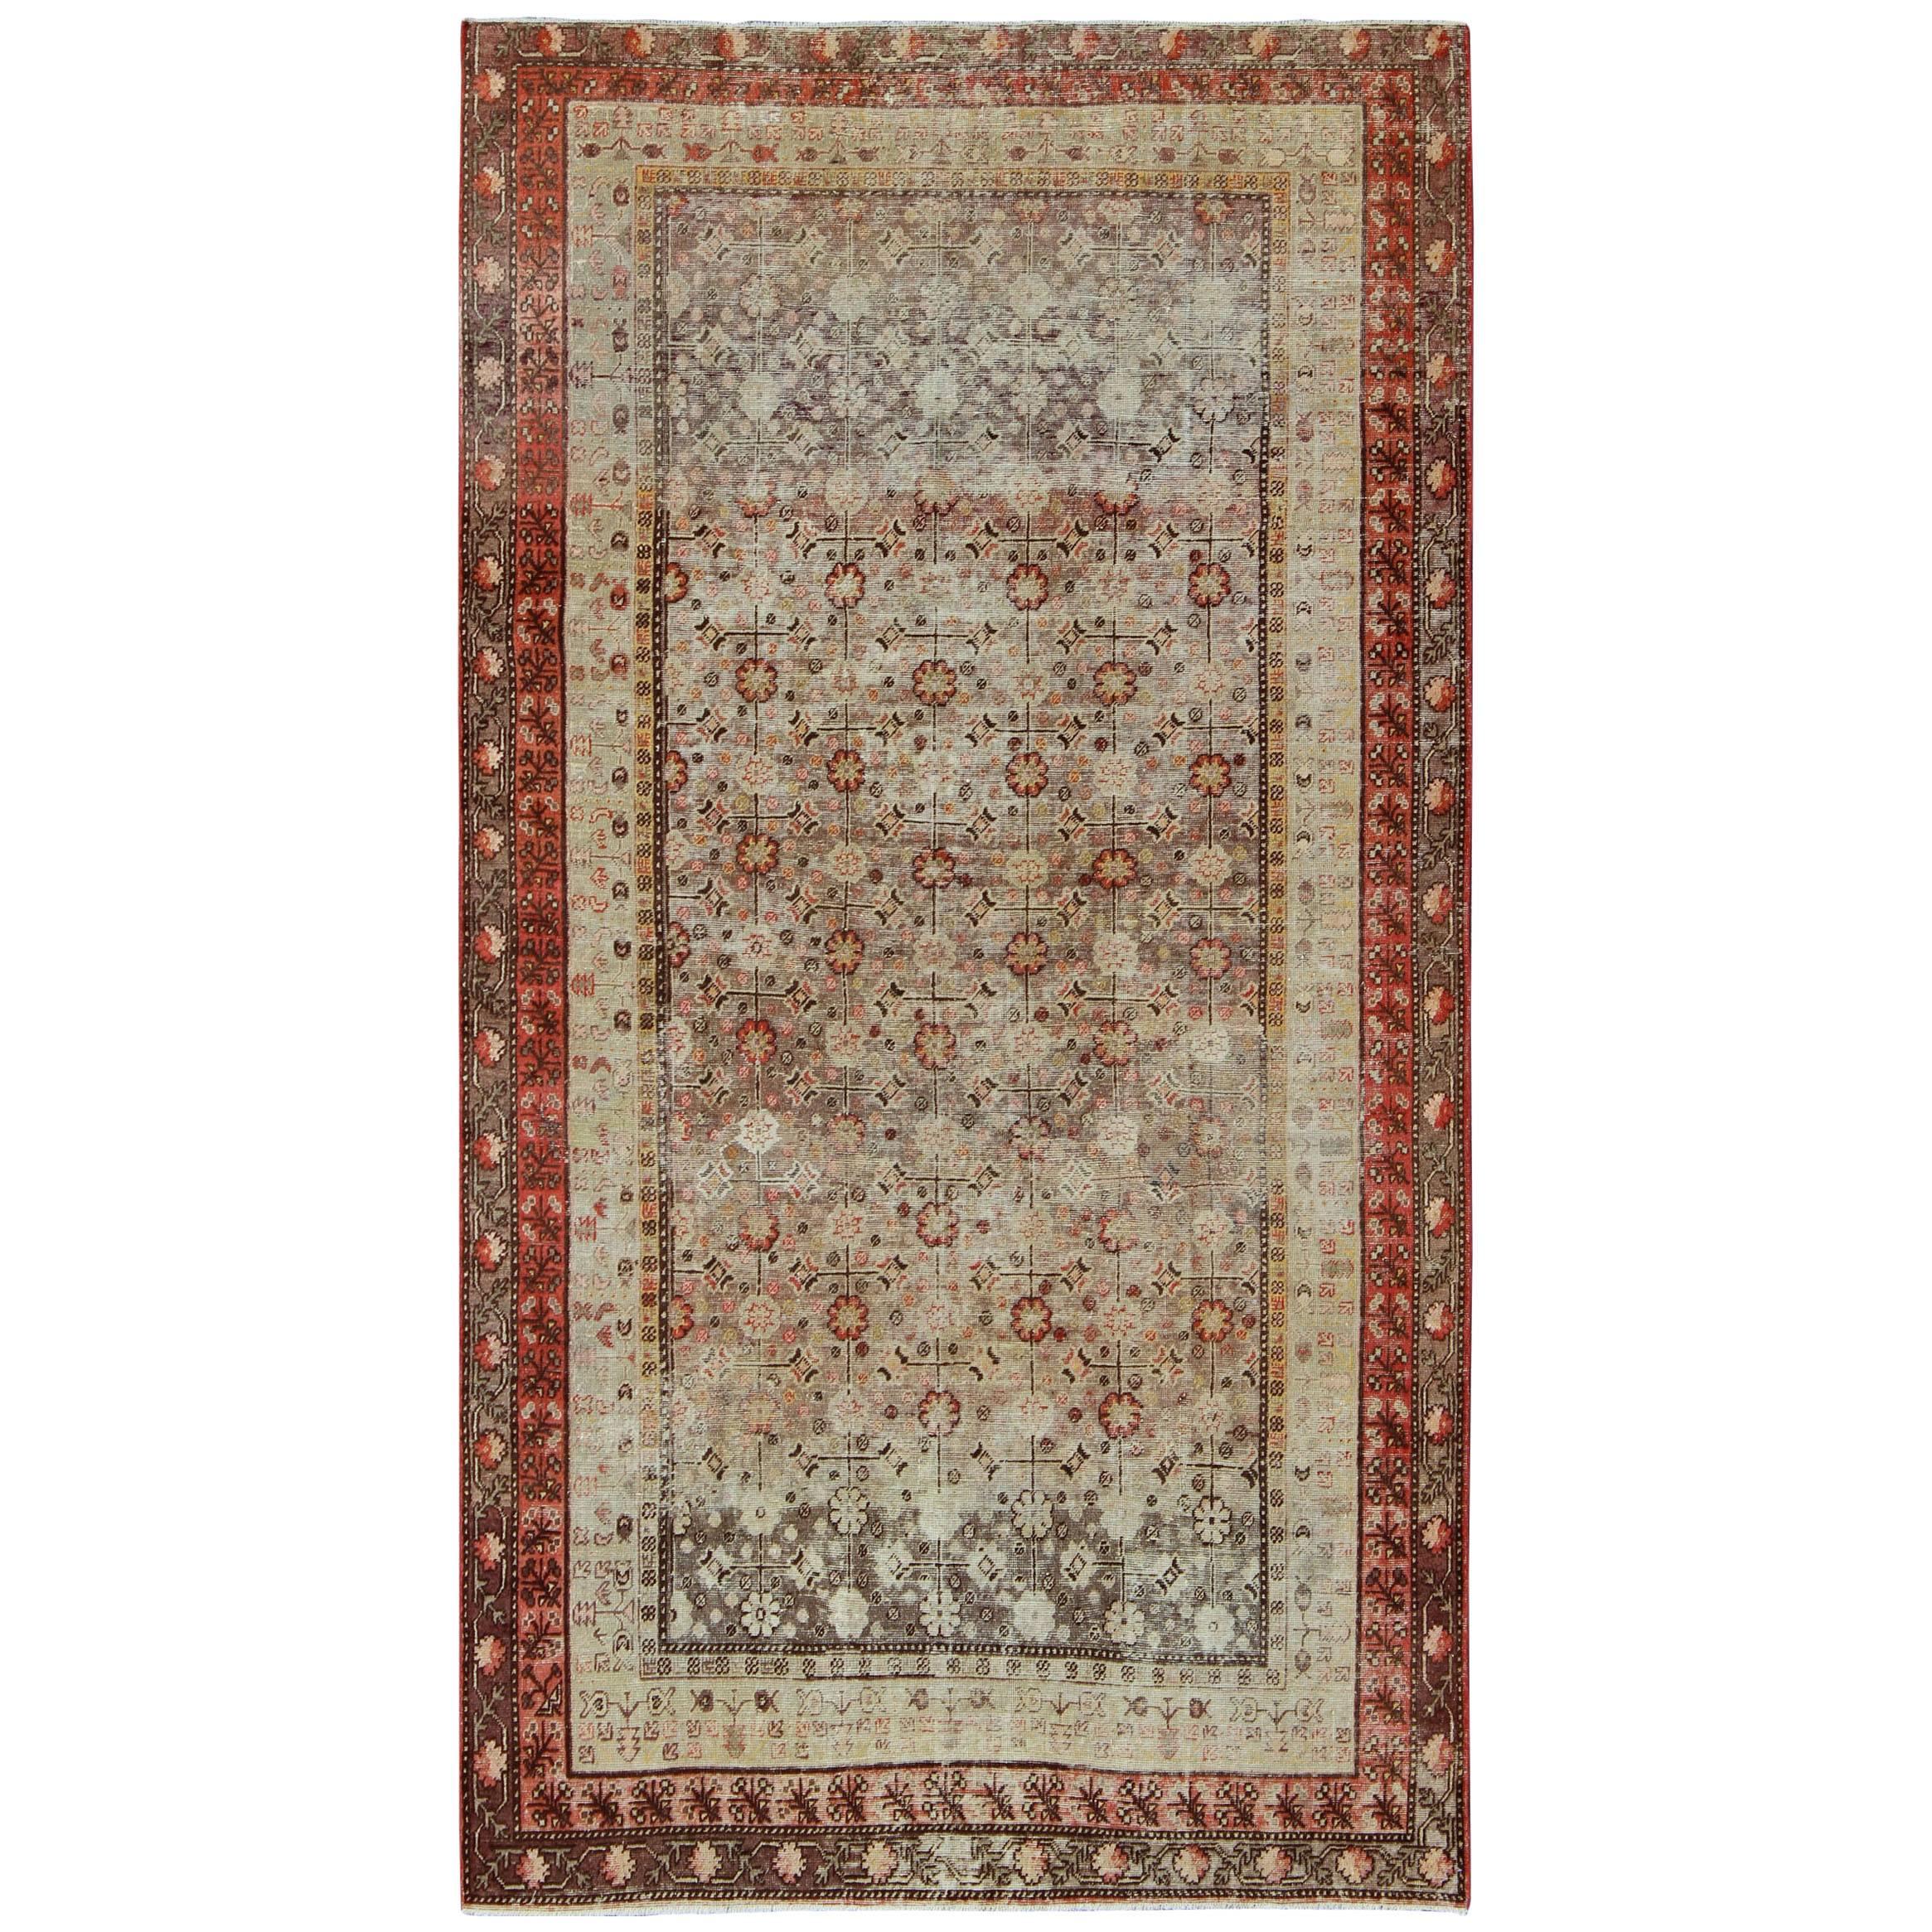 Exquisite Antique Khotan Rug with Intricate All-Over Sub-Geometric Floral Design